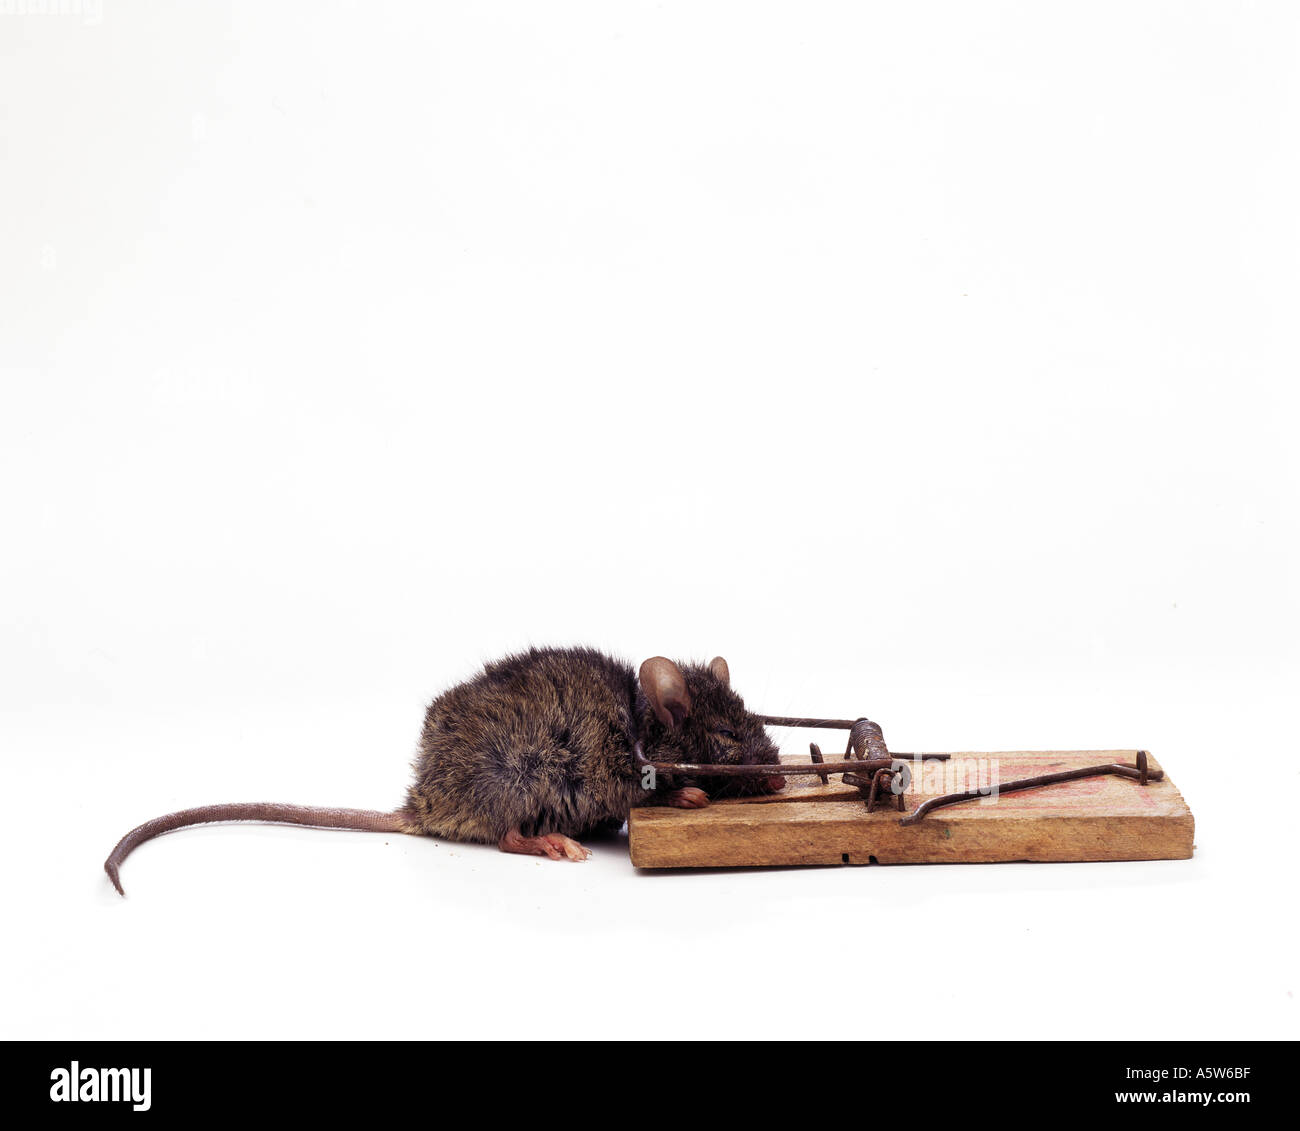 https://c8.alamy.com/comp/A5W6BF/house-mouse-in-mousetrap-mus-musculuc-A5W6BF.jpg